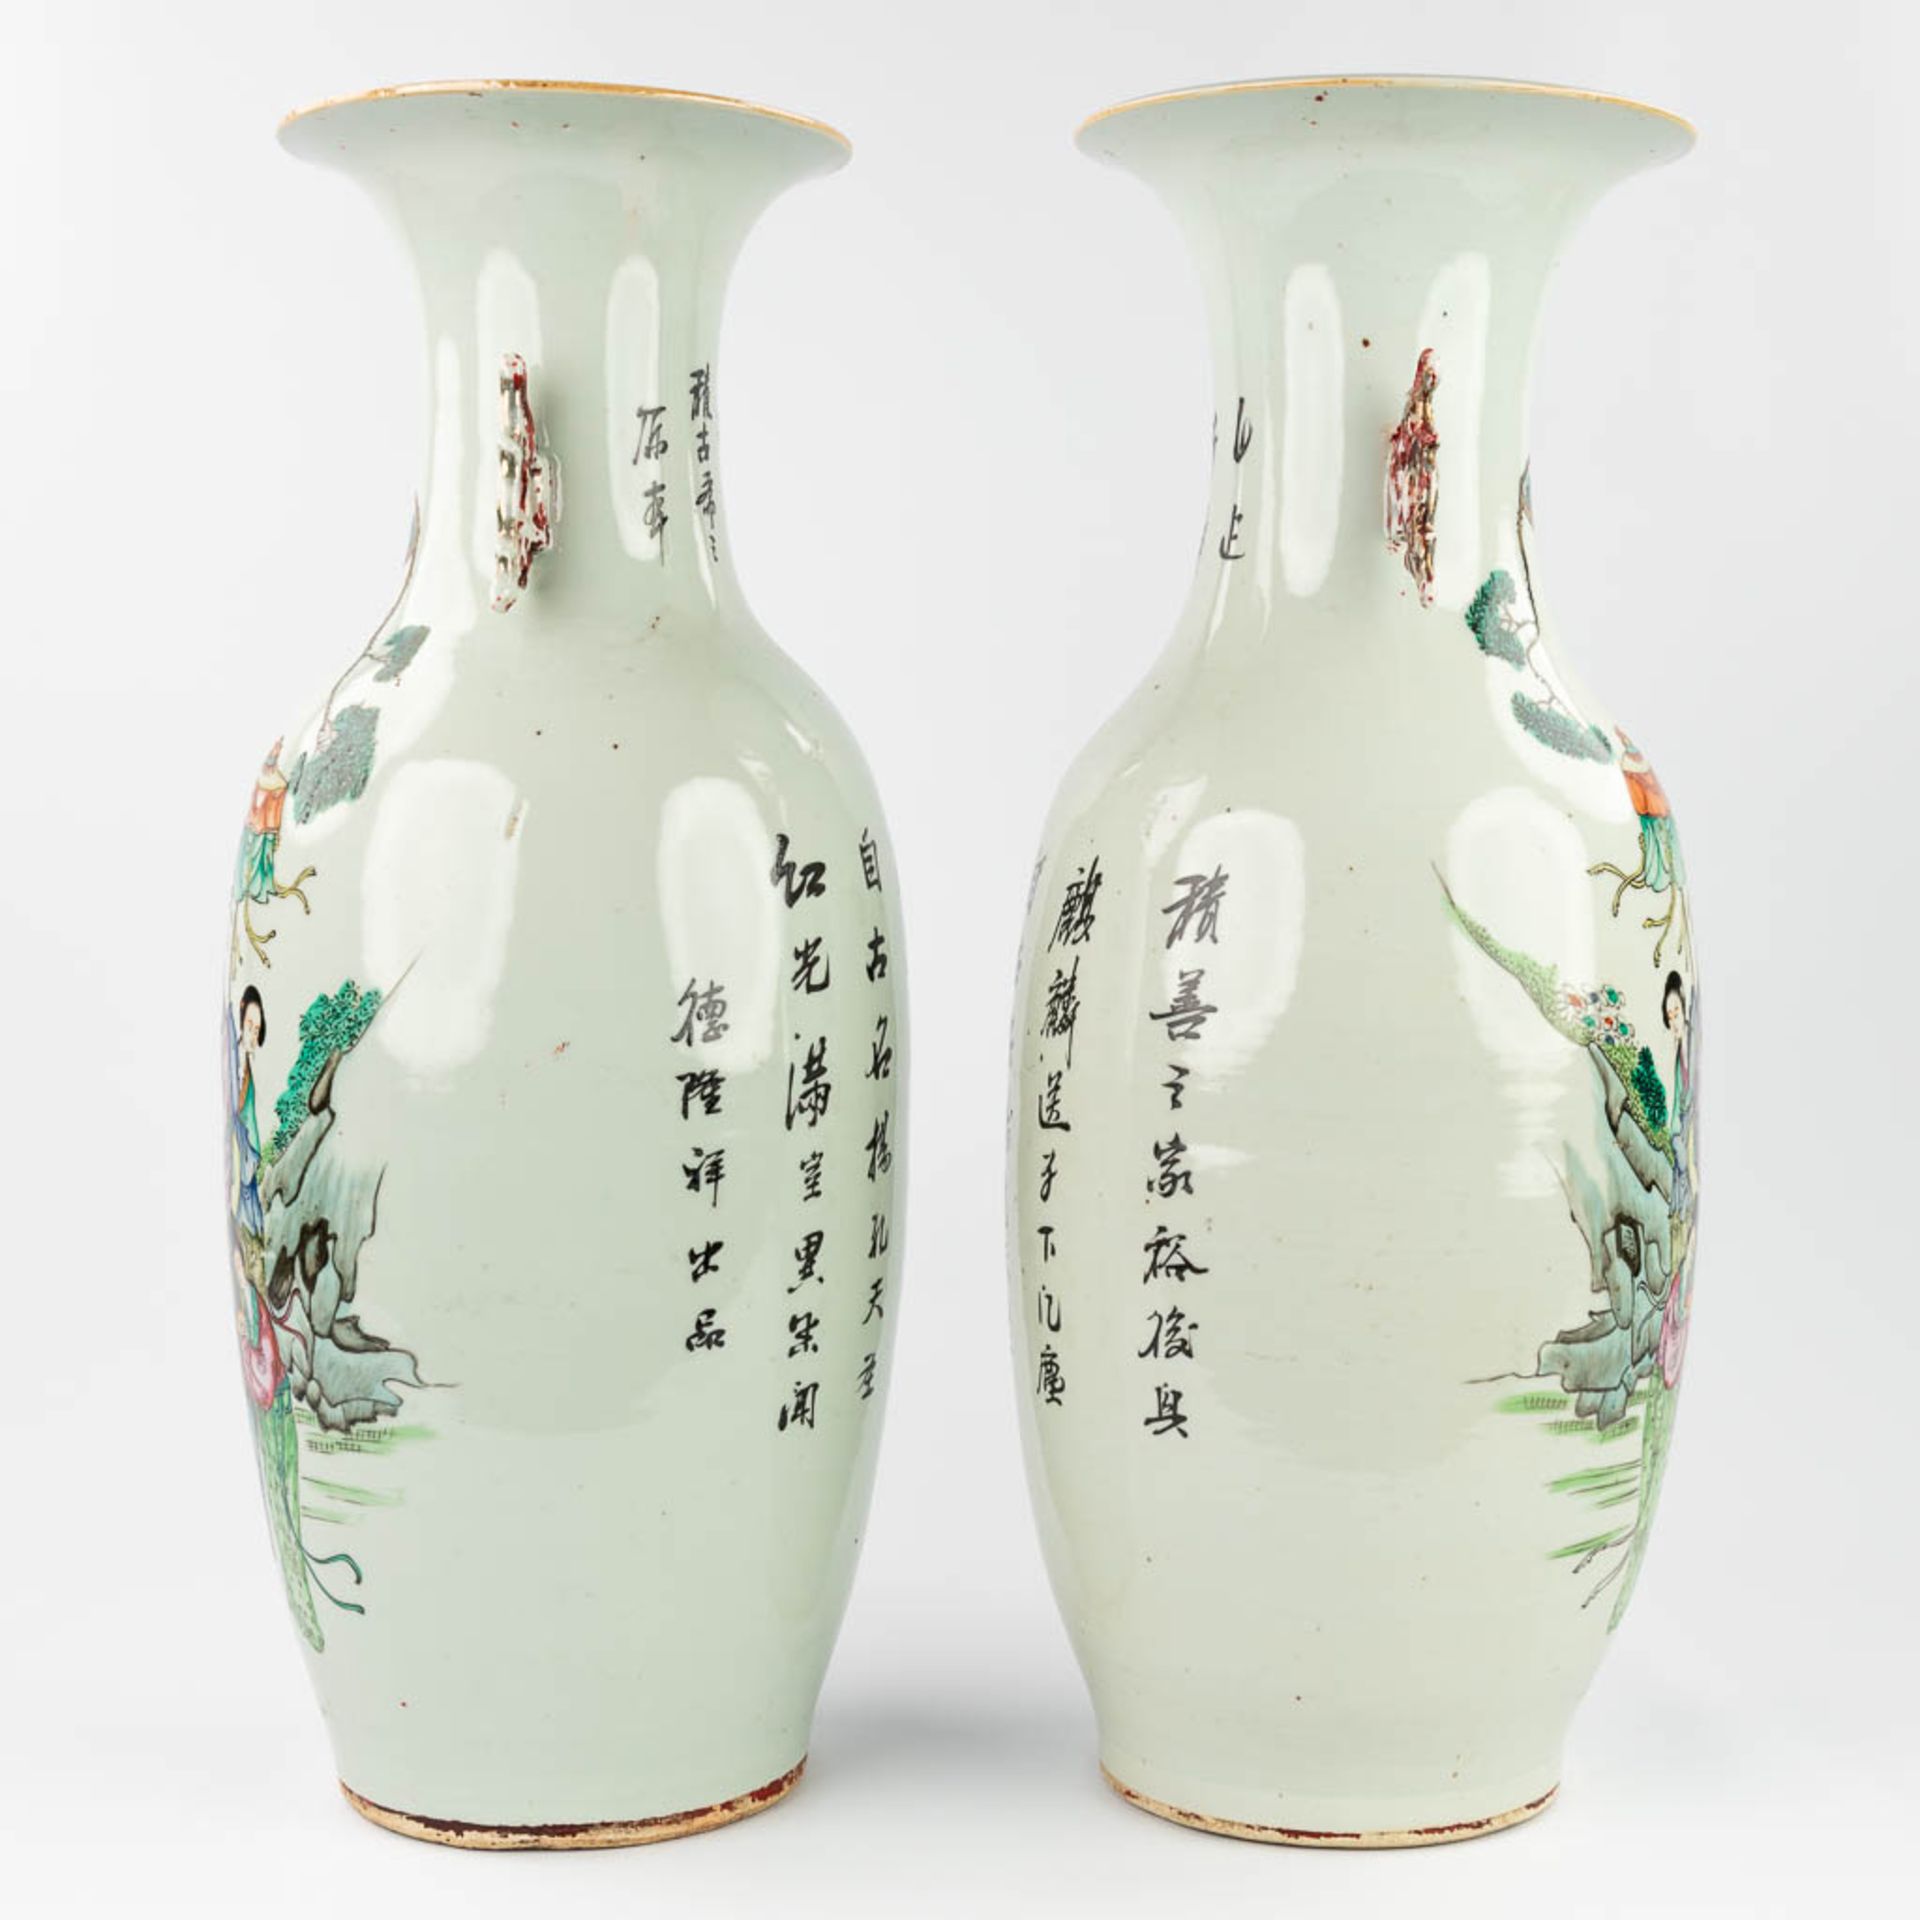 A pair of Chinese vases made of porcelain and decorated with mythological figurines. (58 x 22 cm) - Bild 9 aus 13